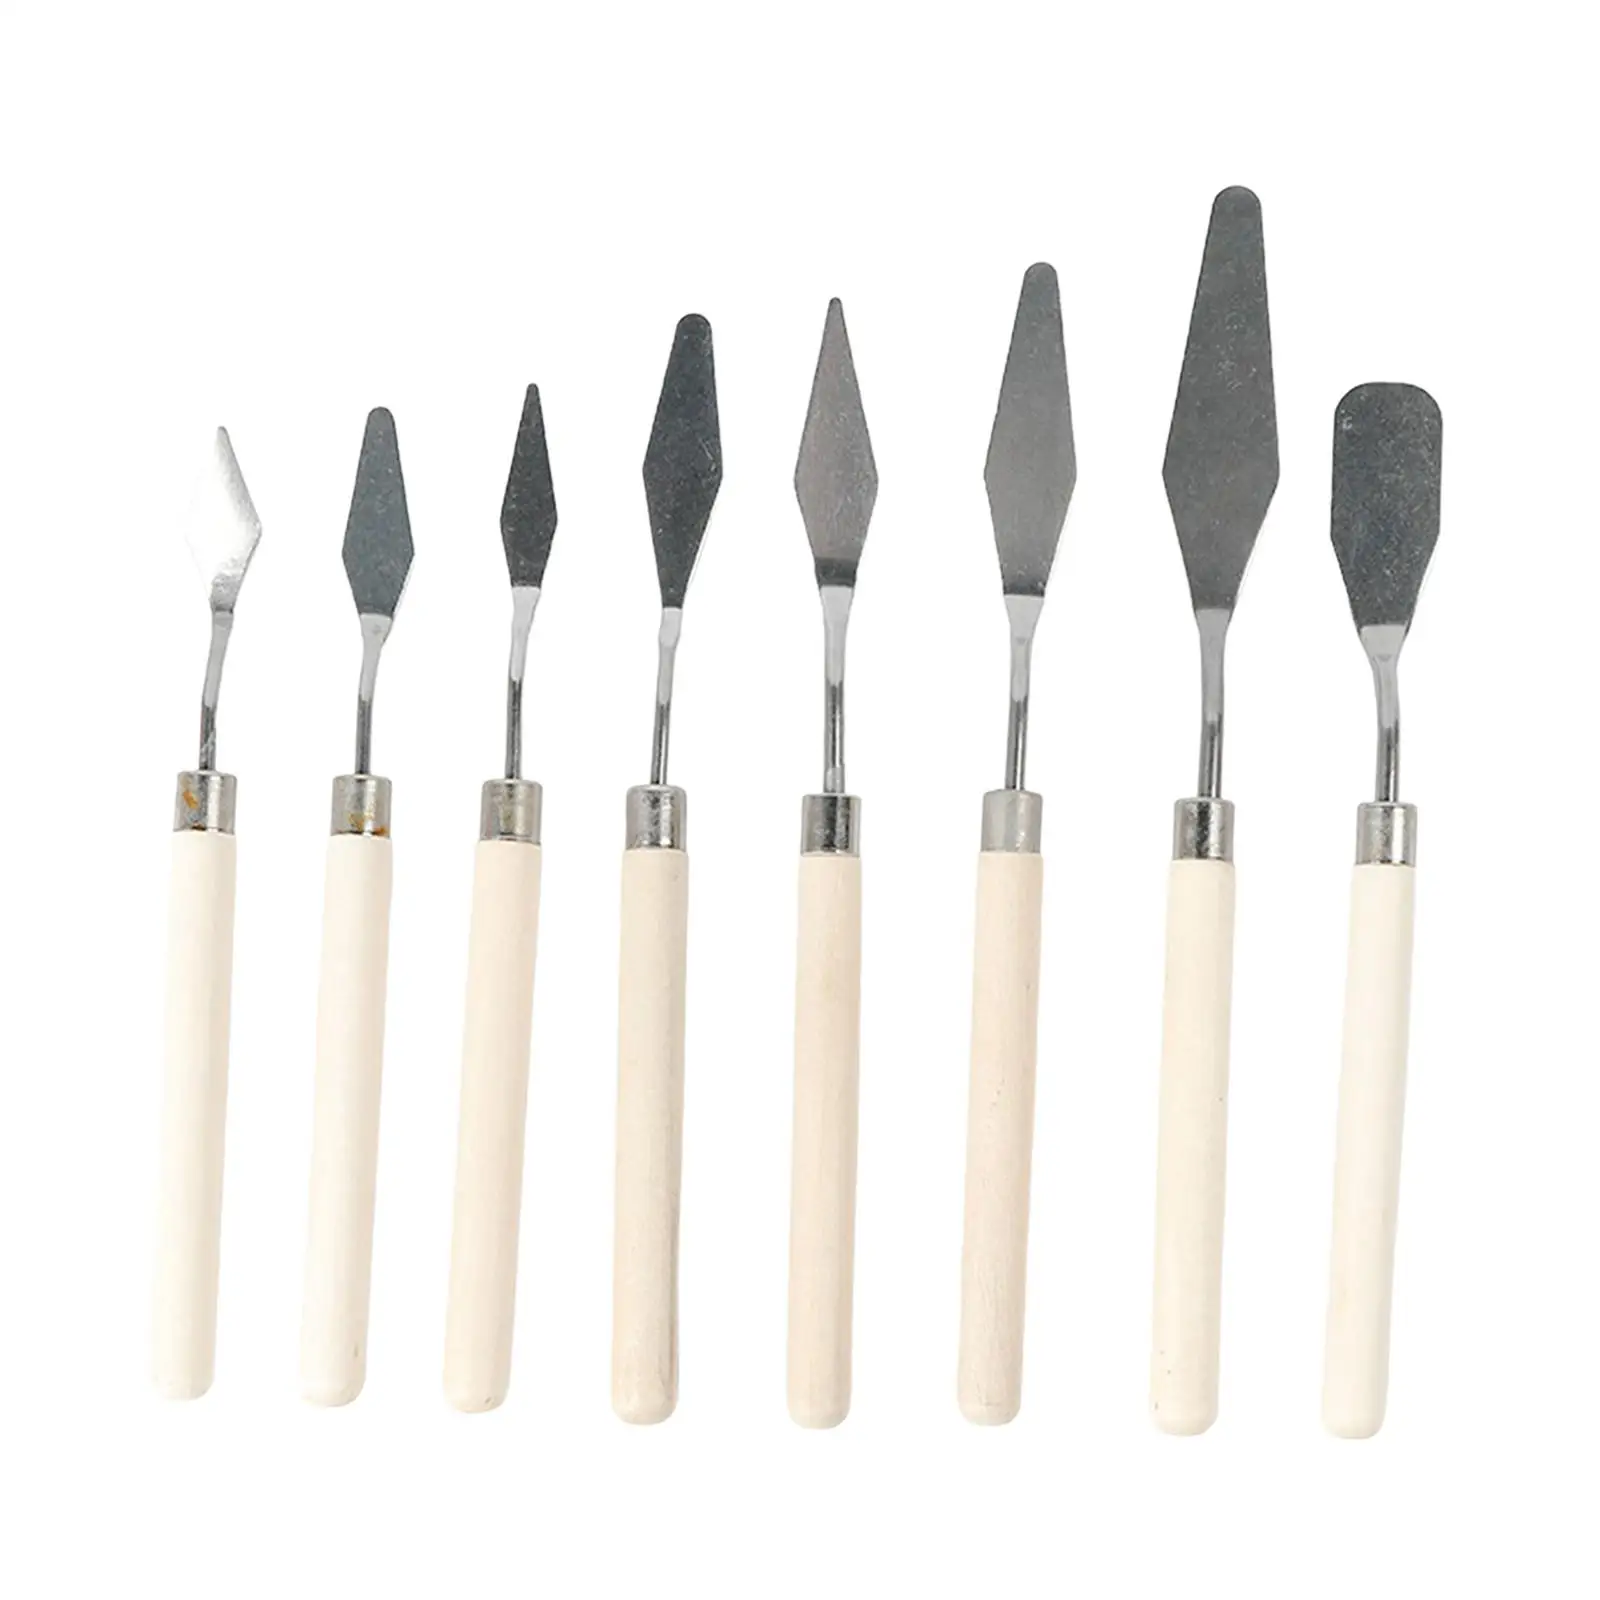 8 Pieces Stainless Steel Painting Knives Set Smearing Color Mixing Scraper Palette Knife for Watercolor Oil Canvas Acrylic Paint